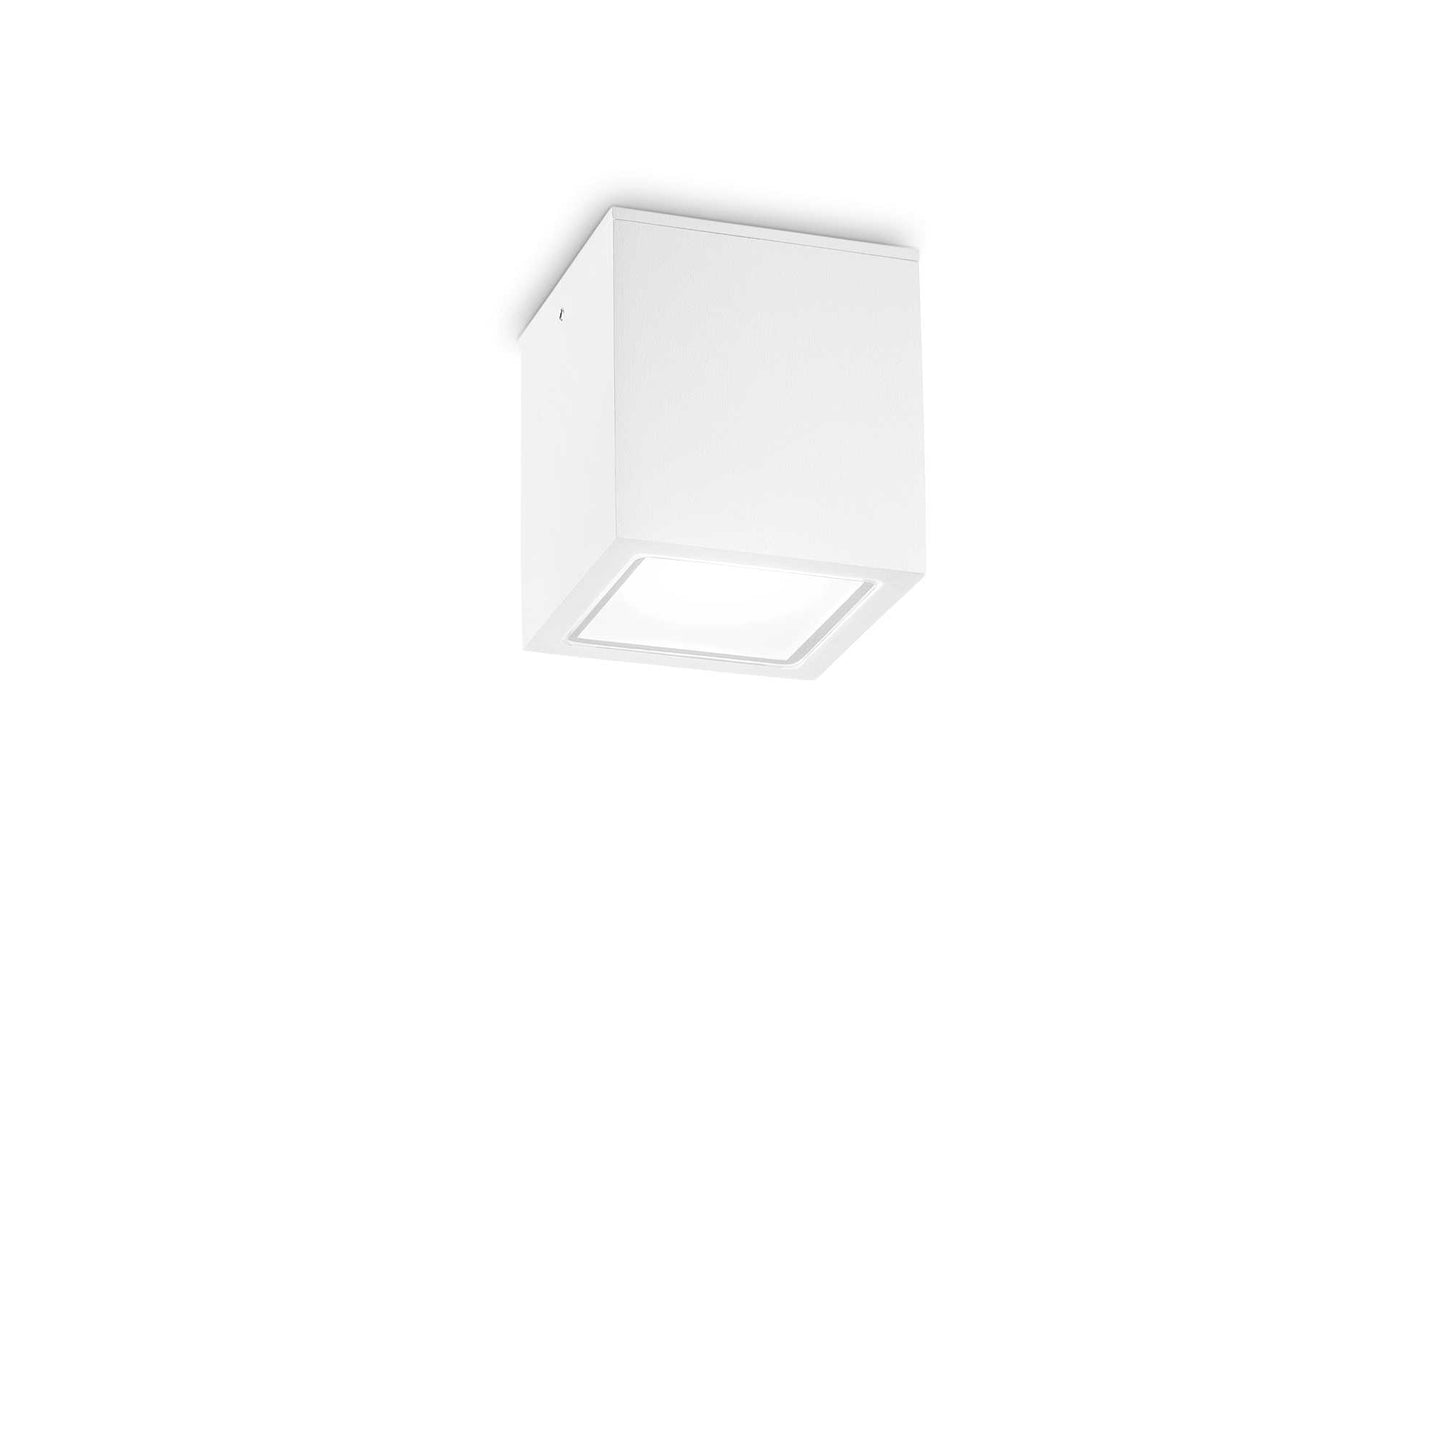 White Whateal Lux Lux 251561 Techo Small GU10 LED IP54 Techo moderno